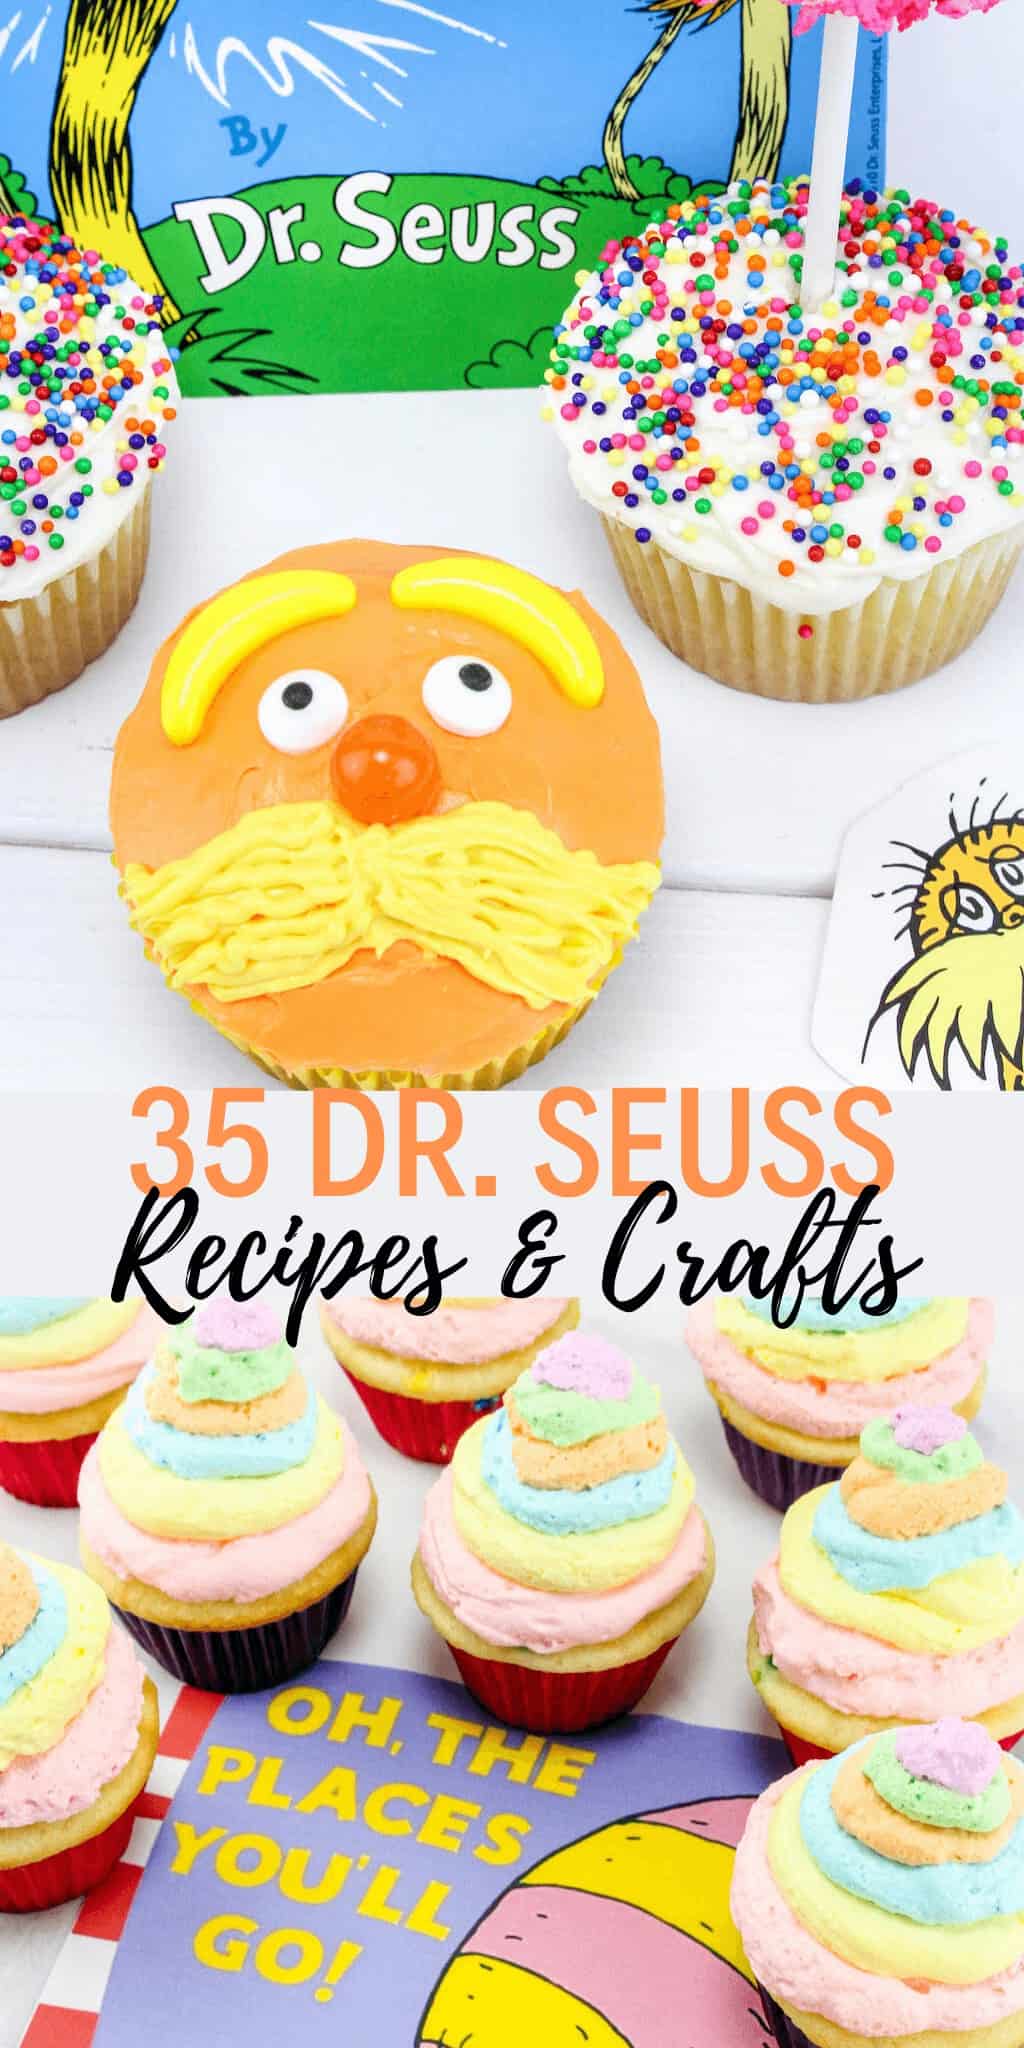 35 DR. SEUSS RECIPES AND CRAFTS ROUNDUP